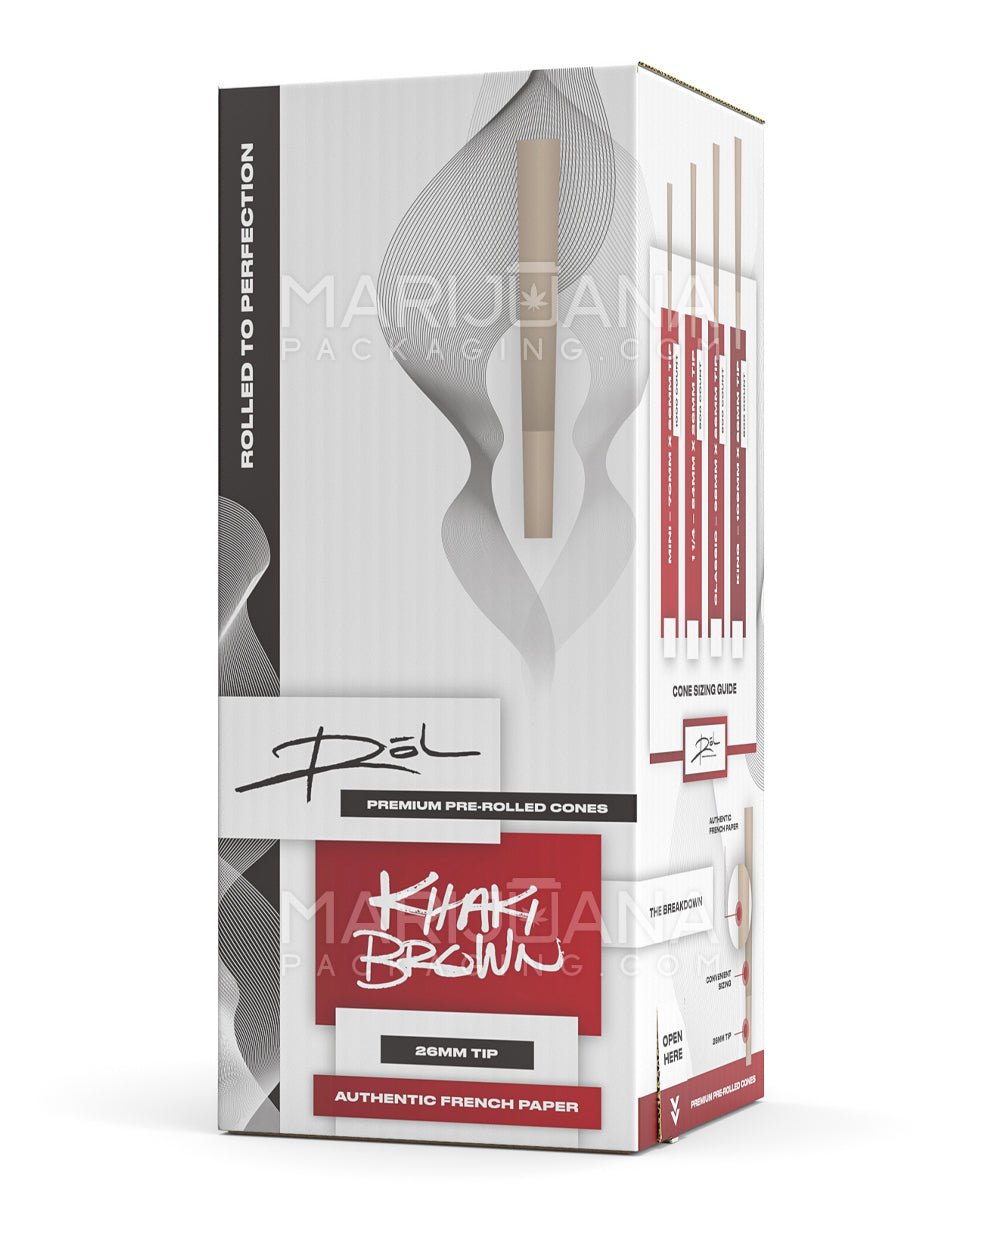 ROL | 1 1/4th Size Pre-Rolled Cones | 84mm - Khaki Brown Paper - 900 Count - 2